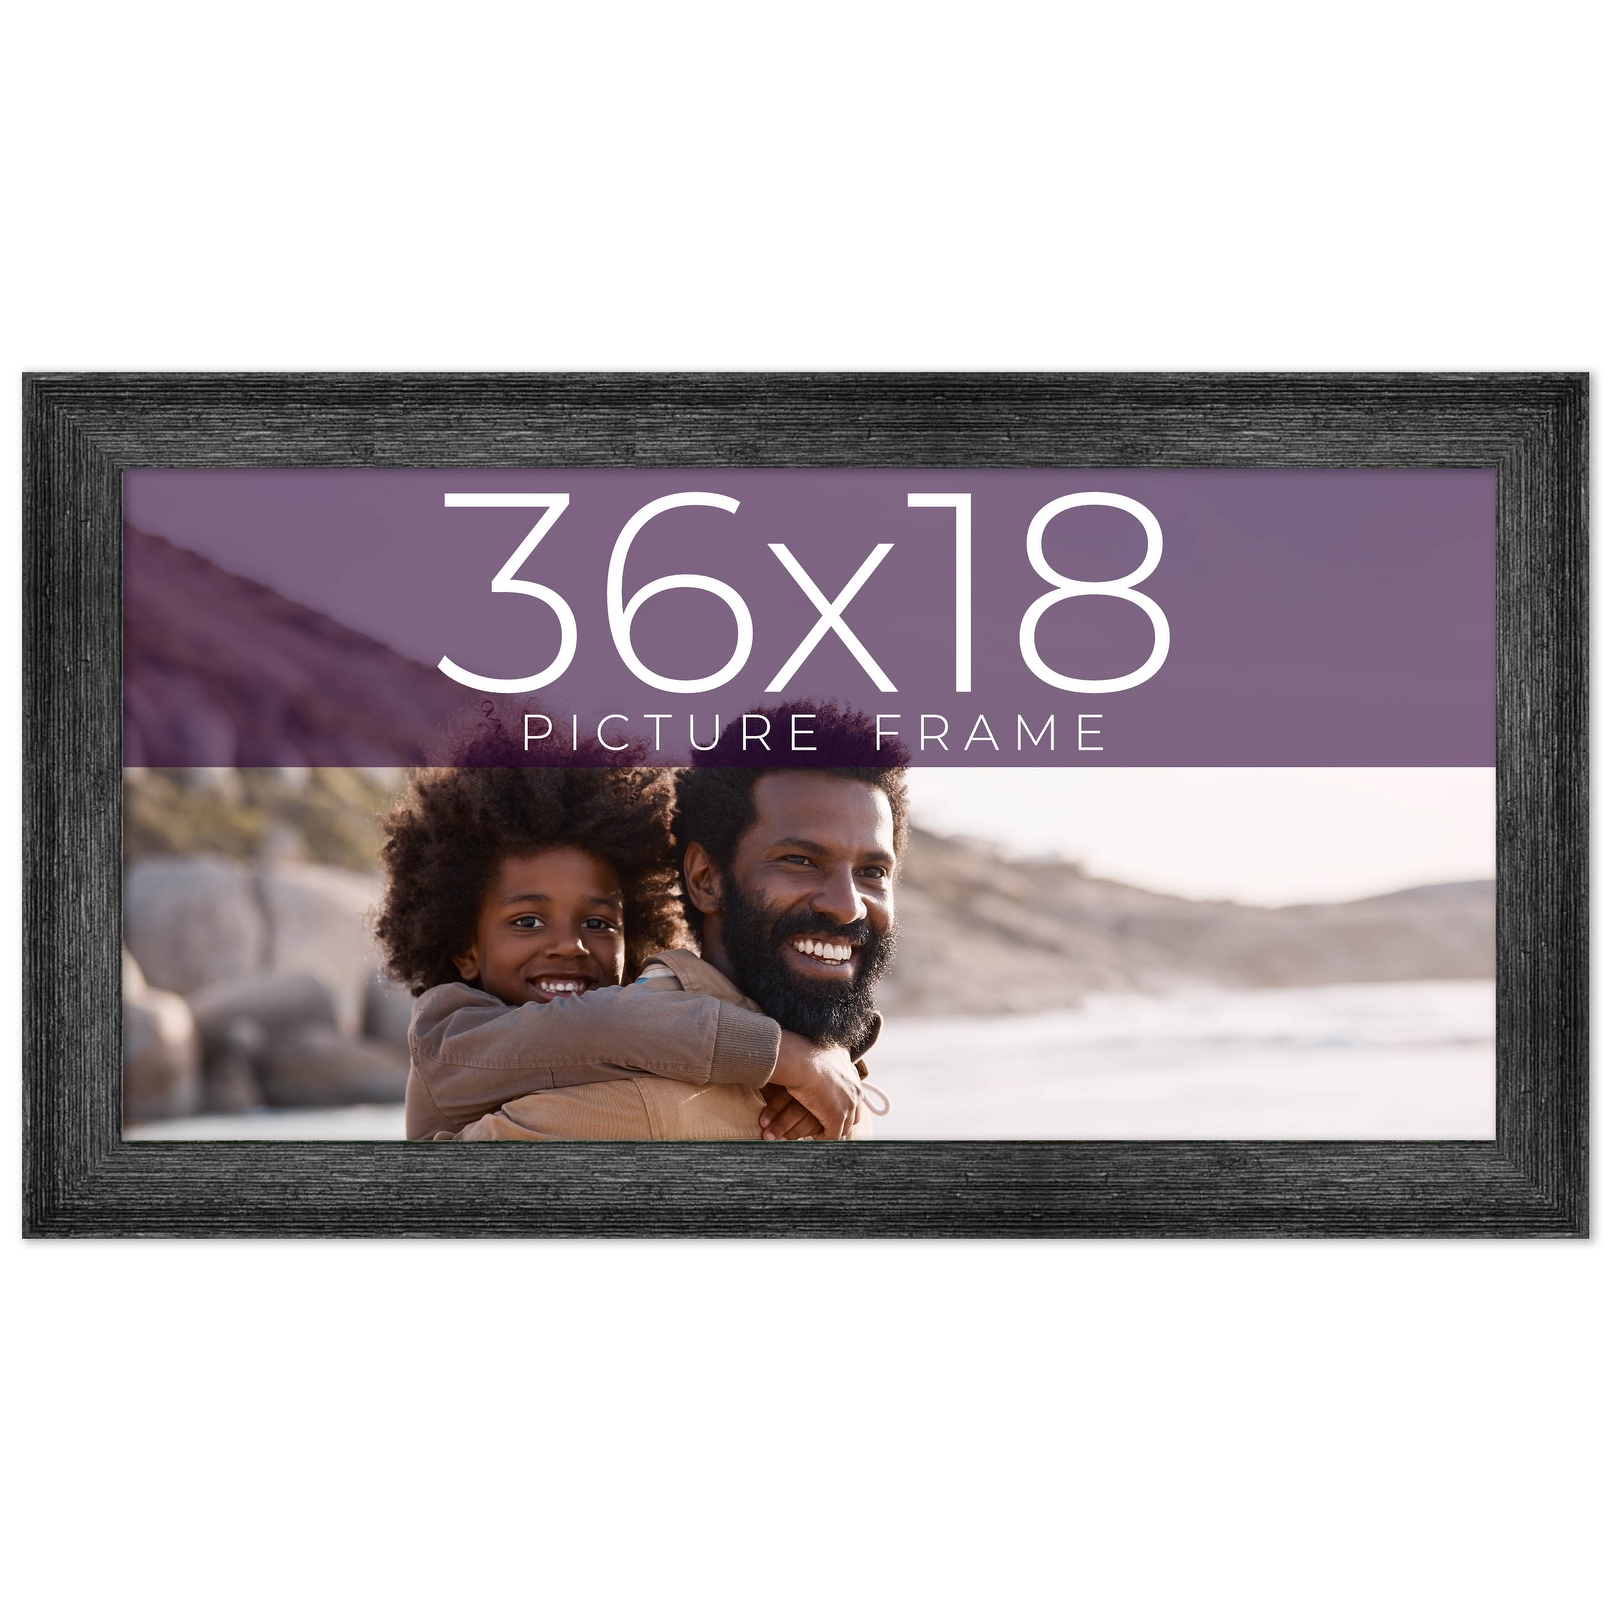 36x18 Black Picture Frame - Wood Picture Frame Complete with UV